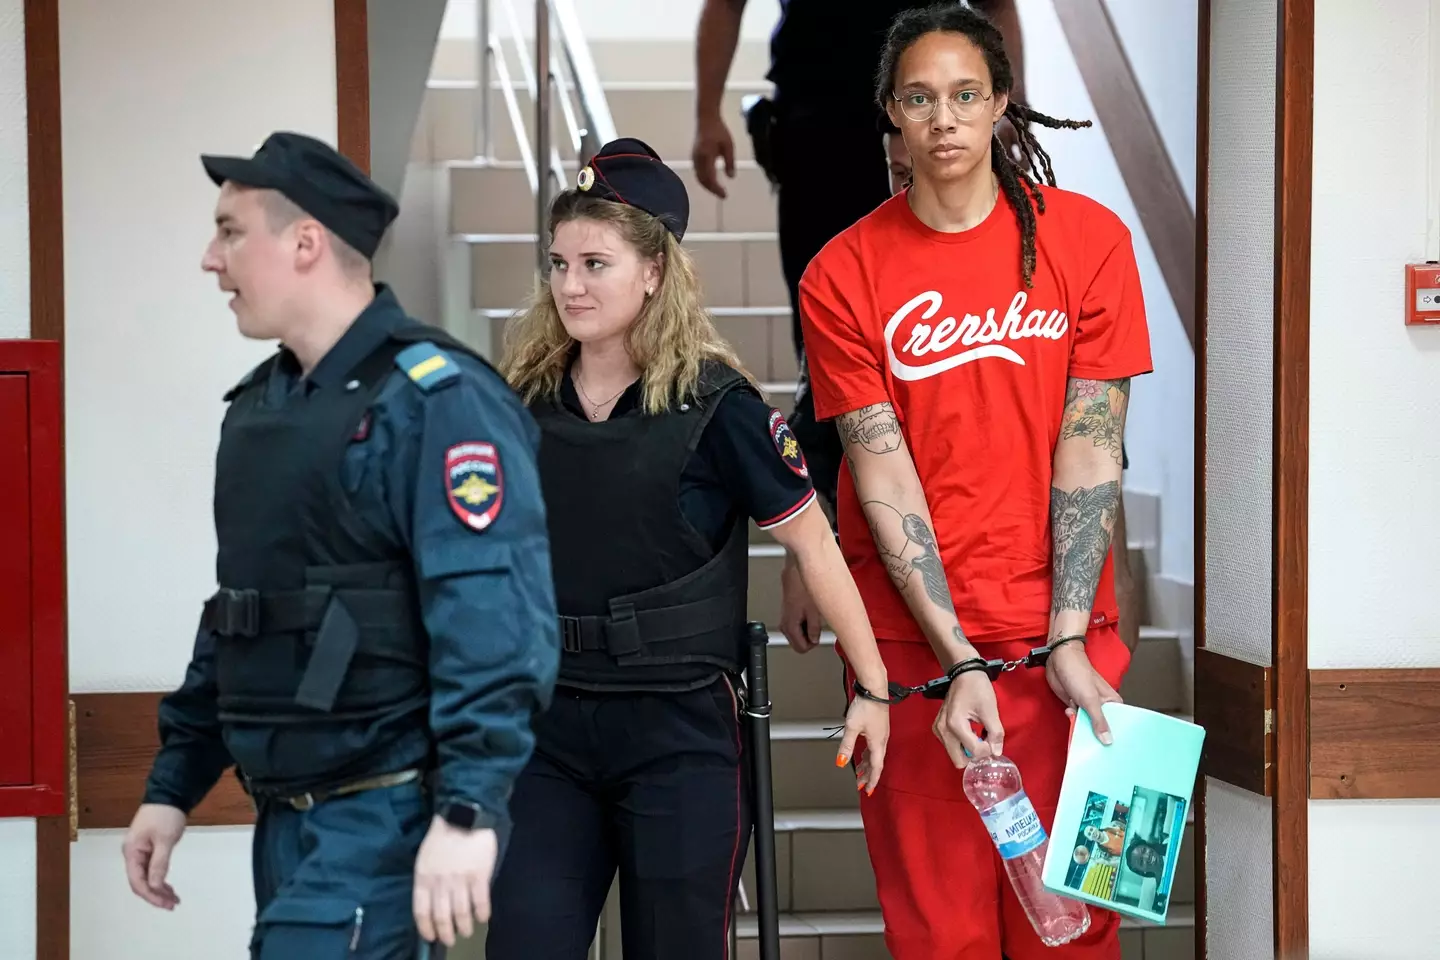 The basketballer was holding a picture of her wife as official led her away in handcuffs.